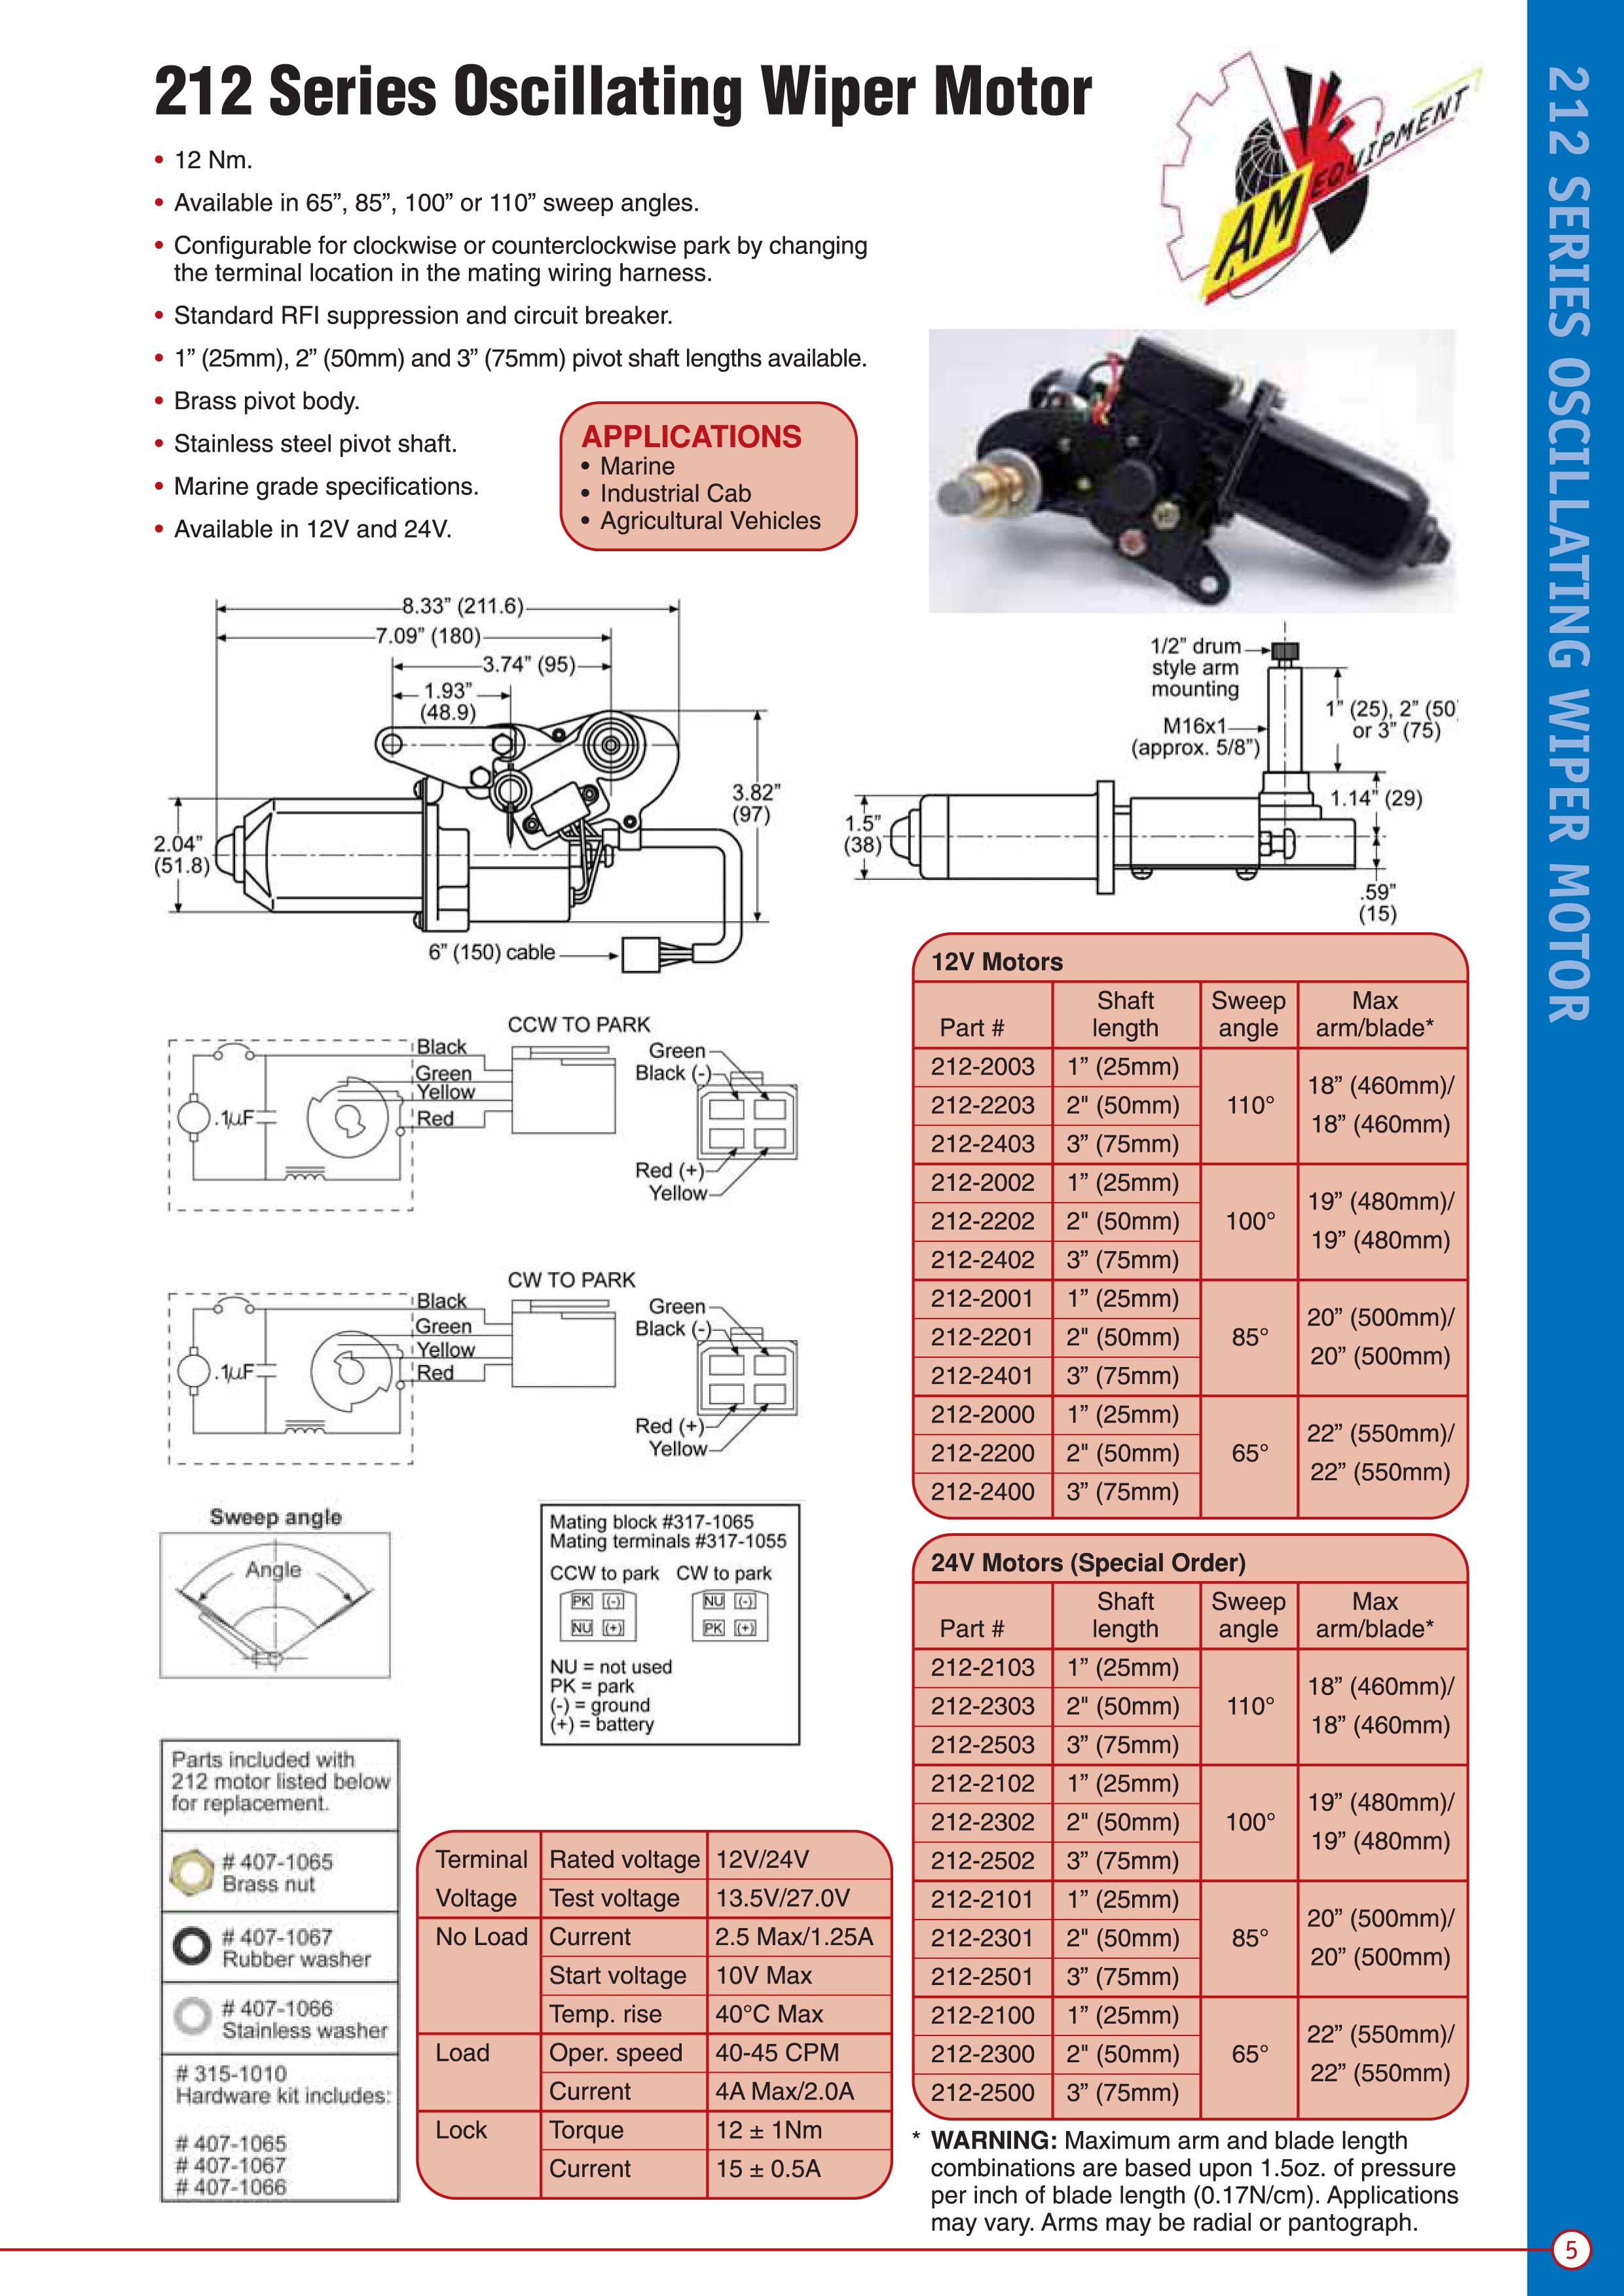 Prime_Composites_WIPERS-5_MOTOR_PAGE_5